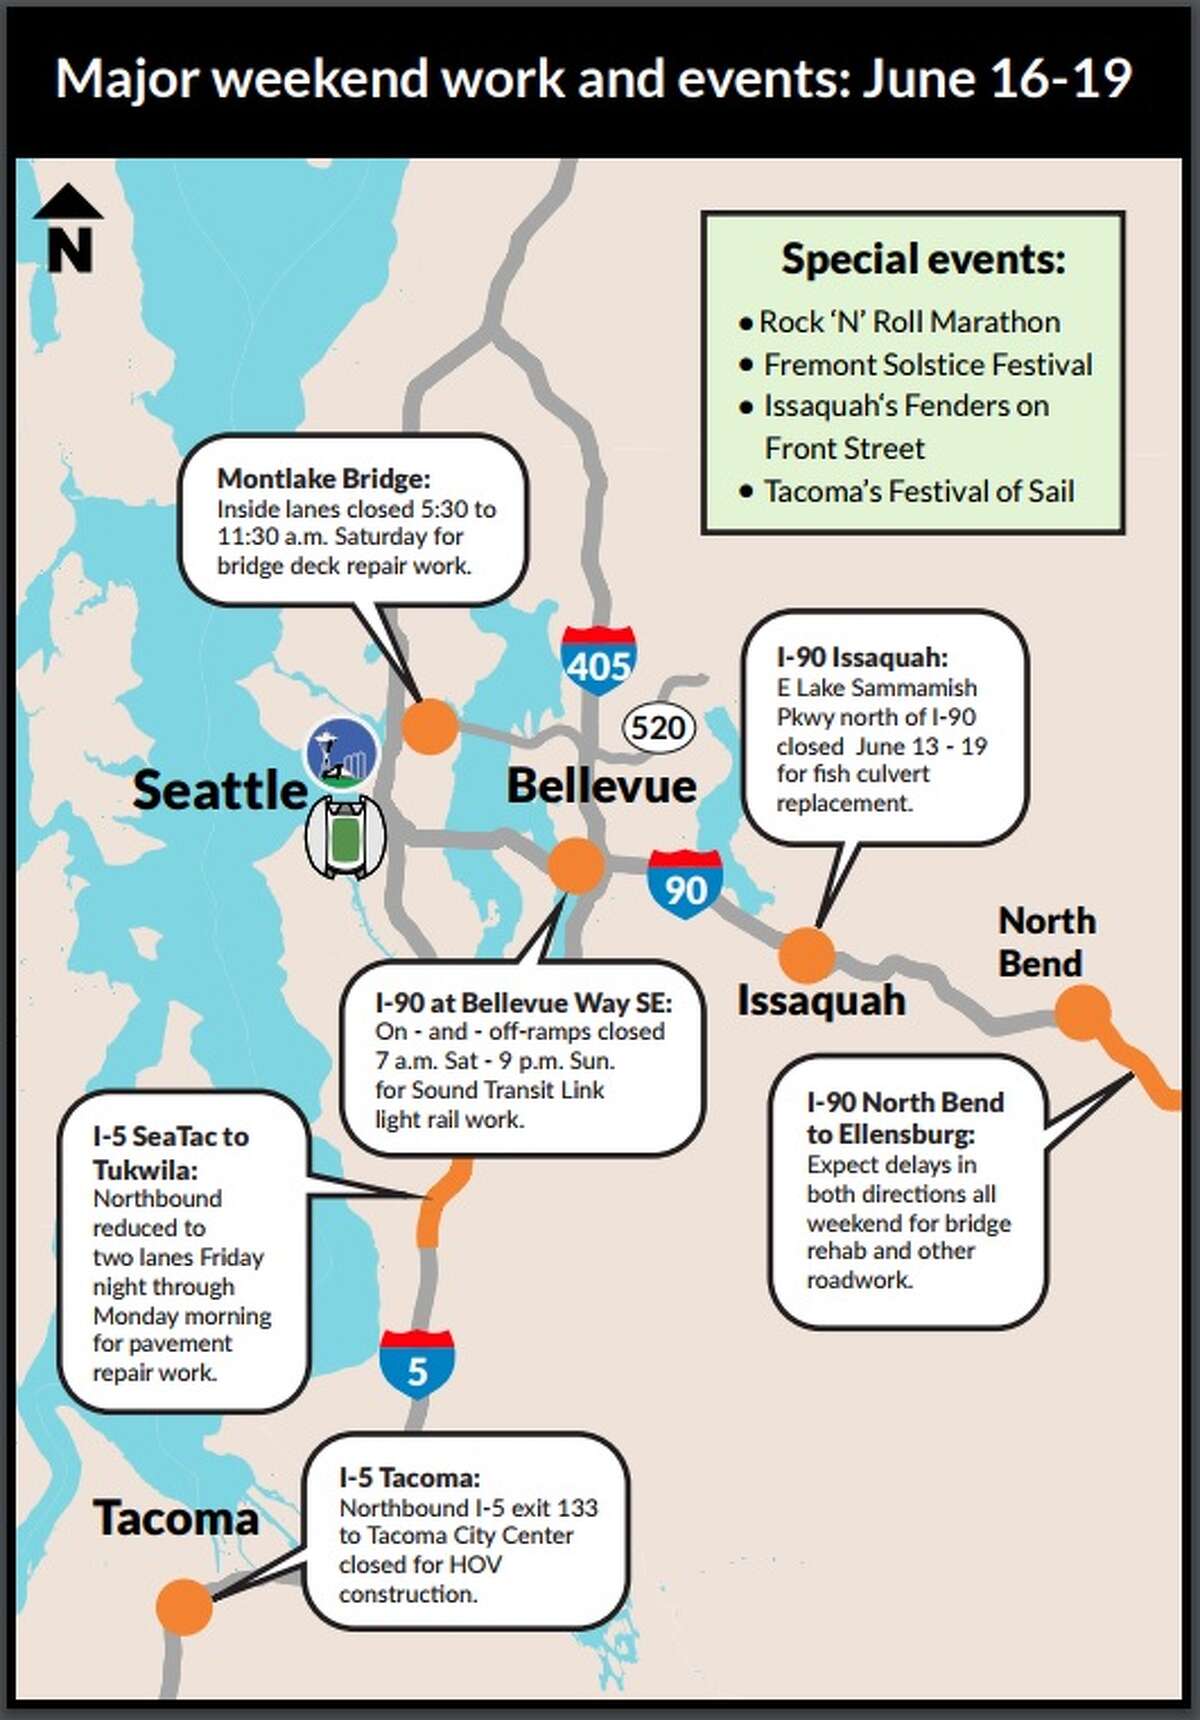 Seattle traffic could be nightmare this weekend